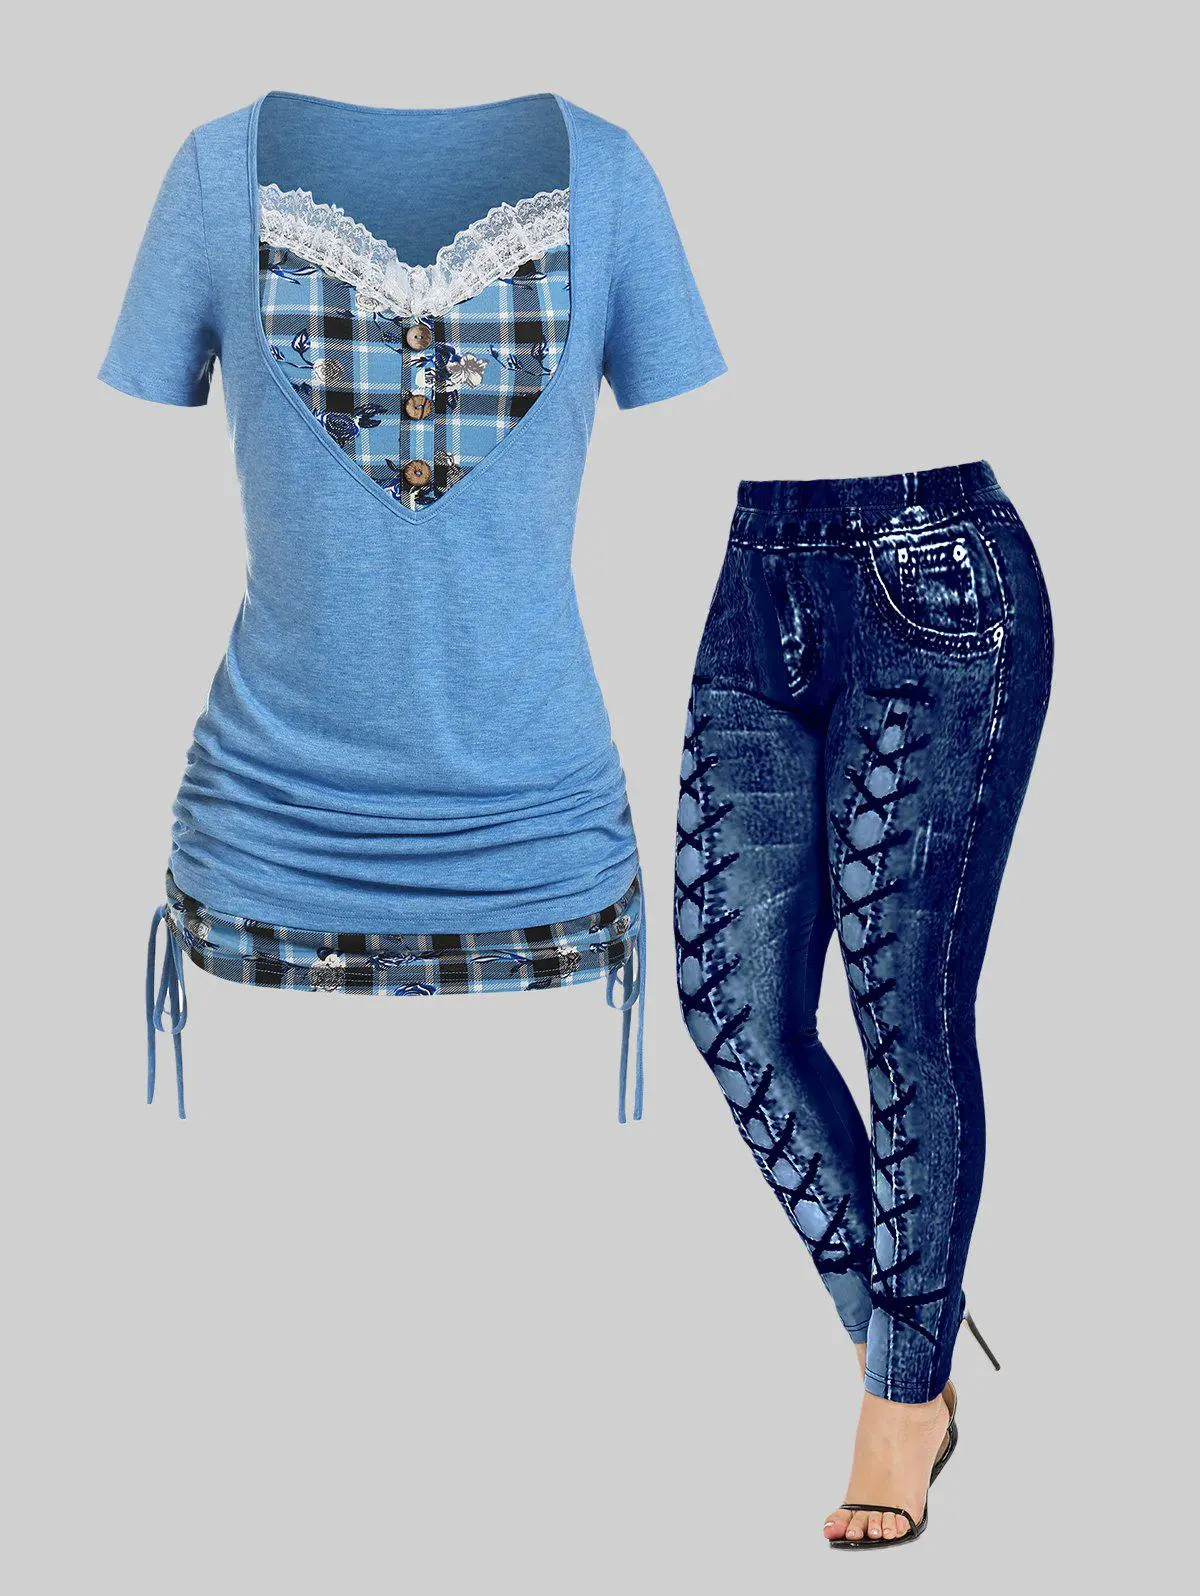 Plaid Cinched 2 in 1 Tee and 3D Printed Curve Leggings Plus Size Summer Outfit